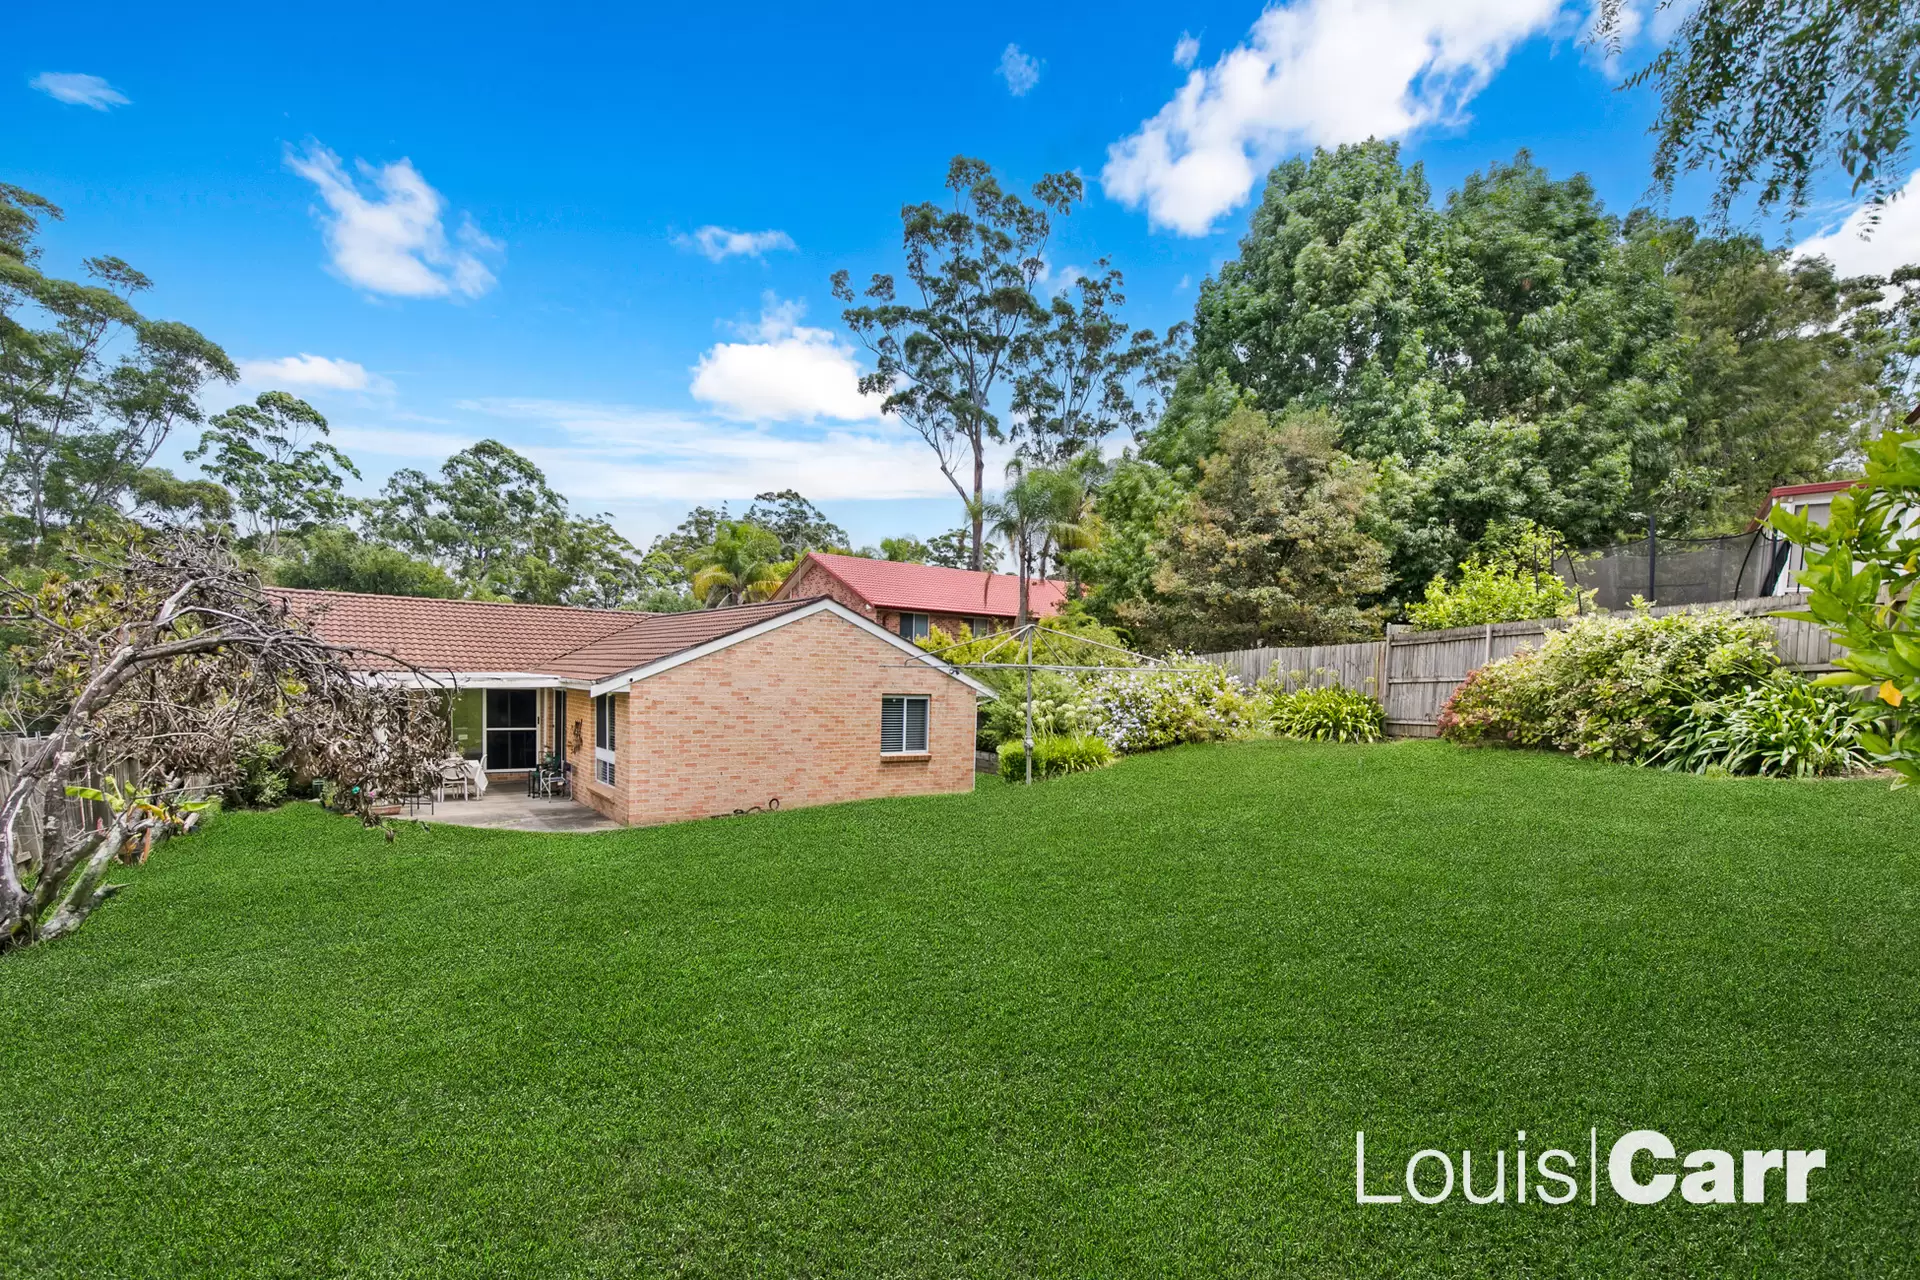 Photo #8: 11 Torrens Place, Cherrybrook - For Lease by Louis Carr Real Estate